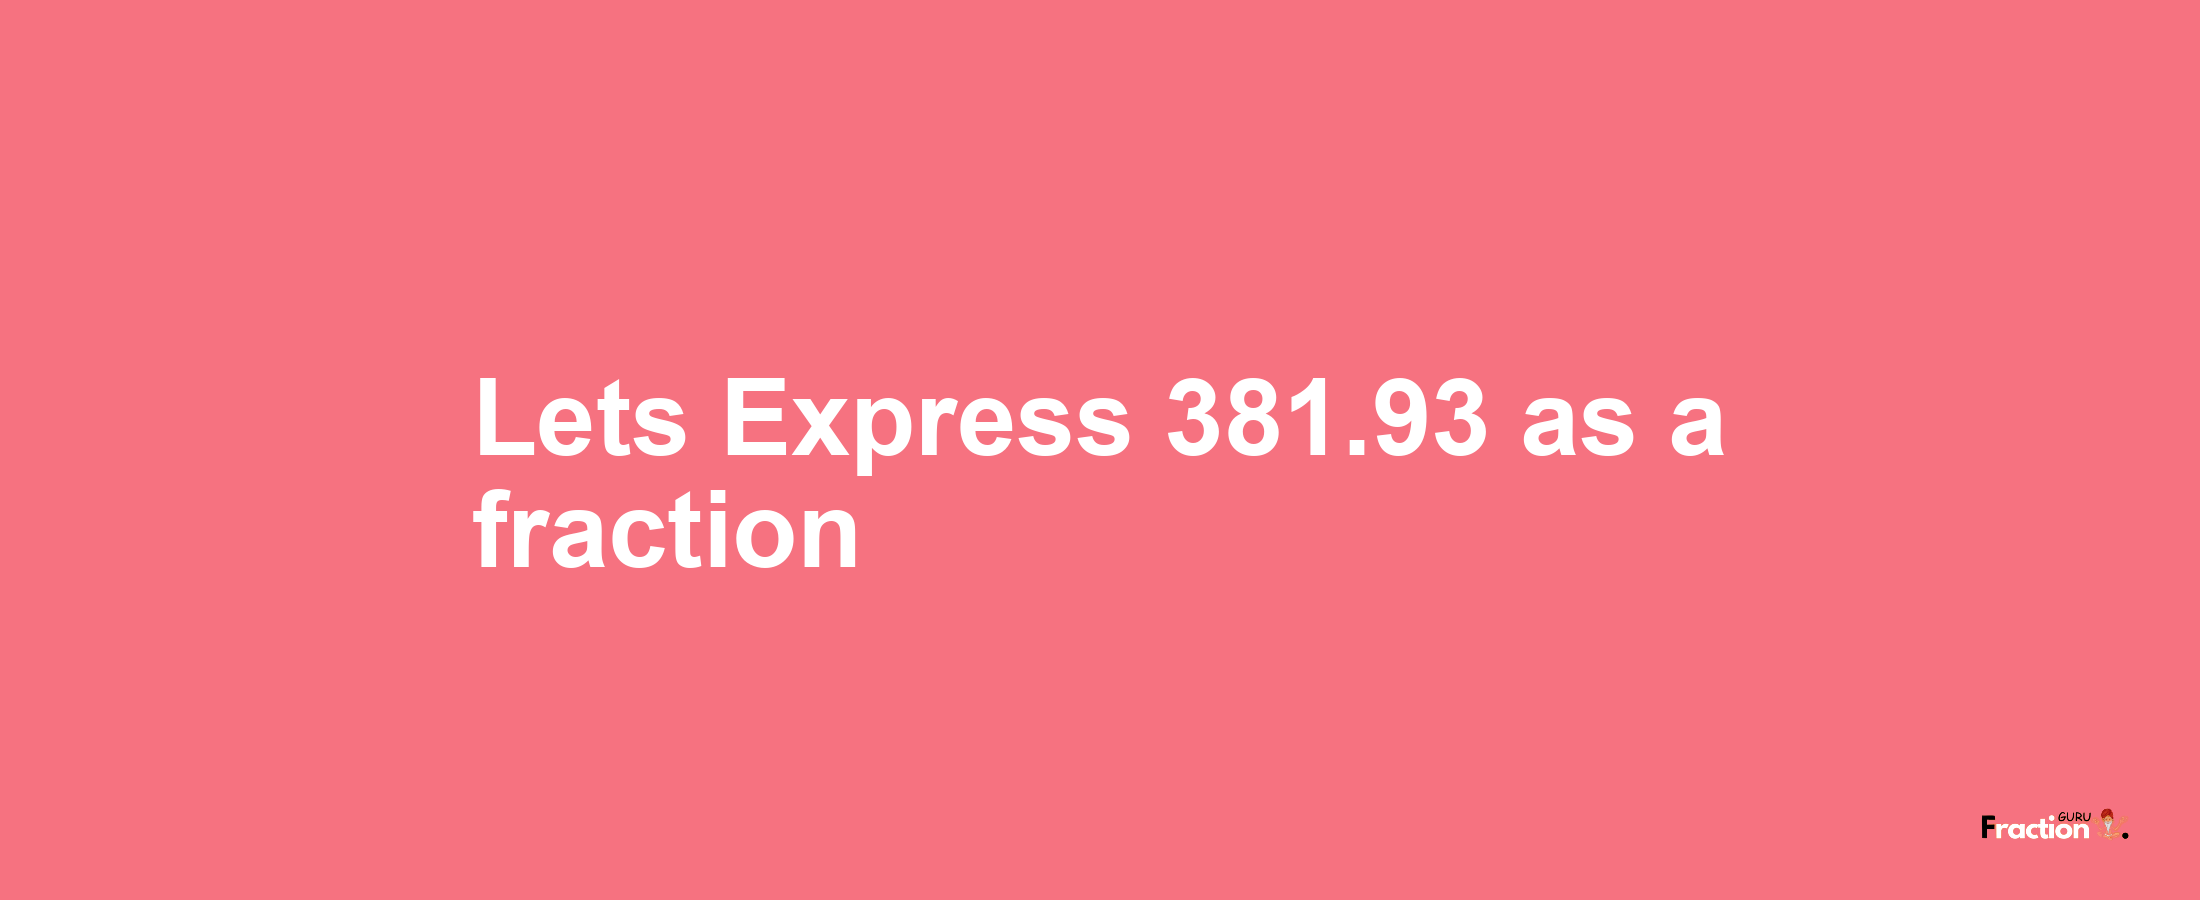 Lets Express 381.93 as afraction